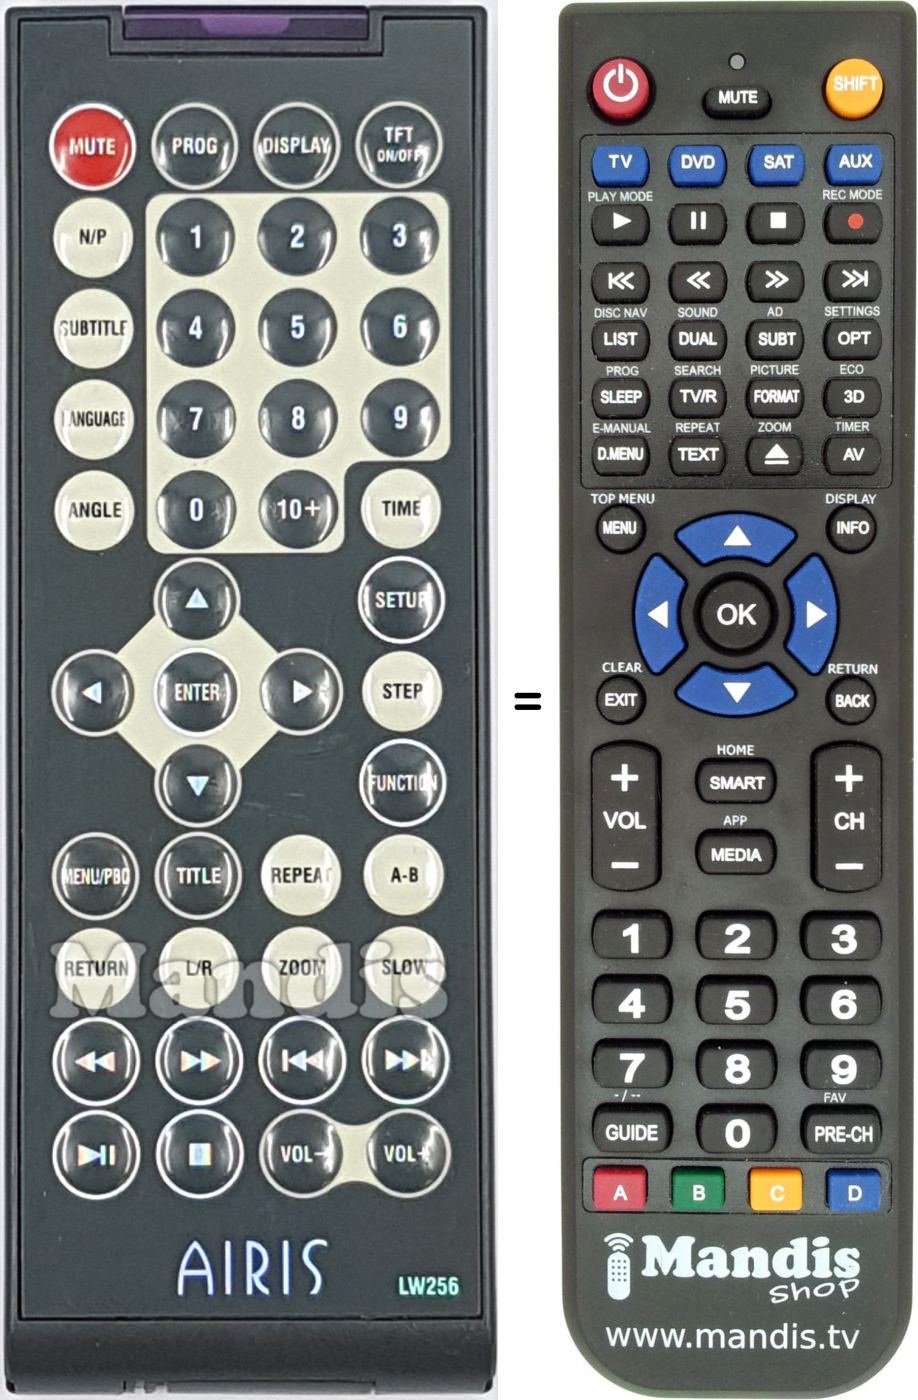 Replacement remote control LW256